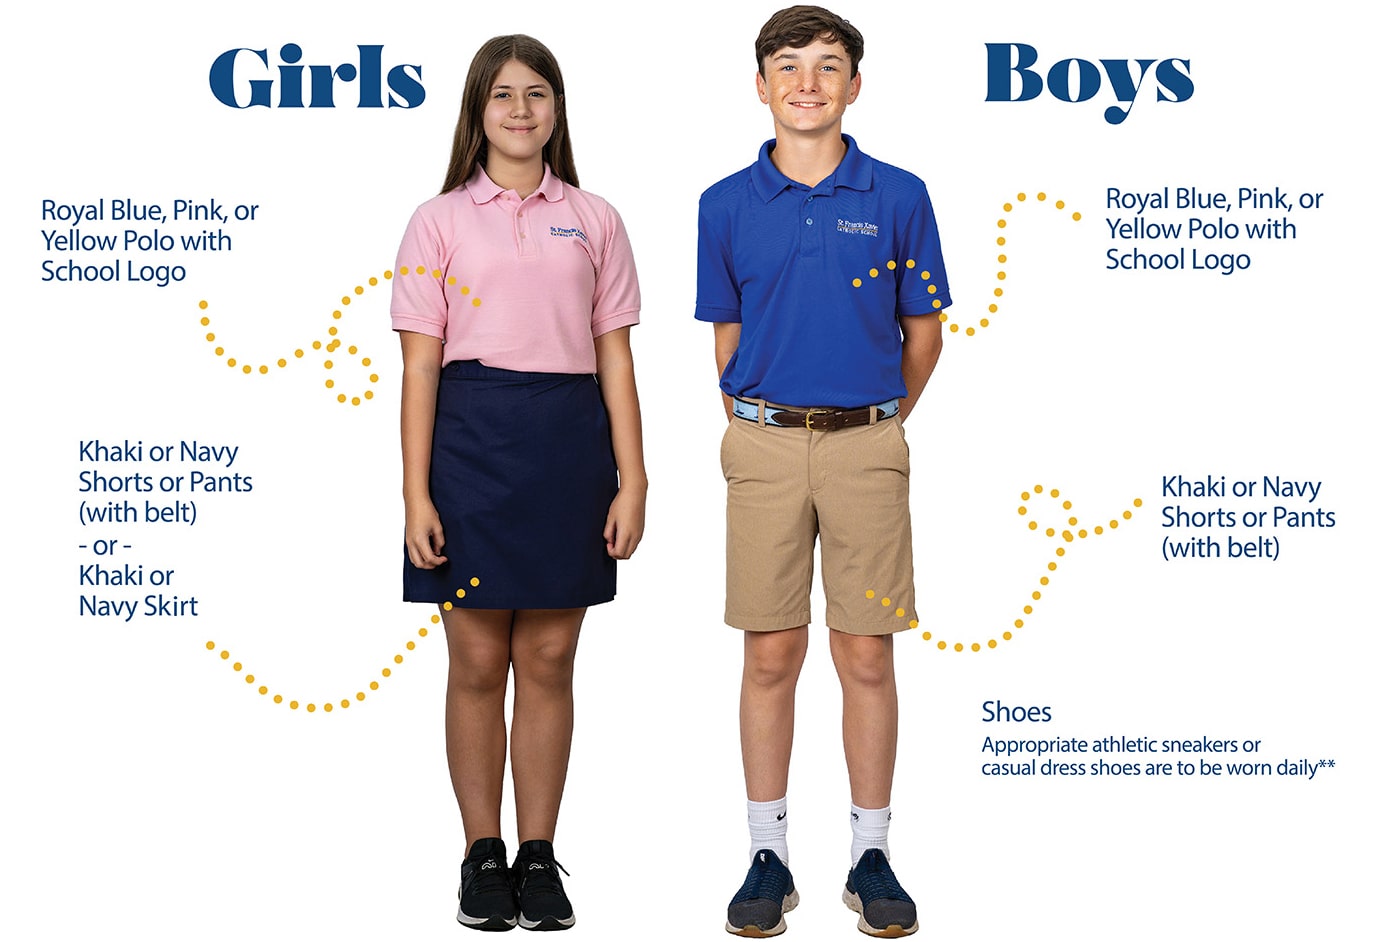 Girls - royal blue, pink, or yellow polo with school logo. Khaki or navy shorts or pants (with belt), or khaki or navy skirt. Boys - royal blue, pink, or yellow polo with school logo. Khaki or navy shorts or pants (with belt). Shoes - appropriate athletic sneakers or casual dress shoes are to be worn daily.